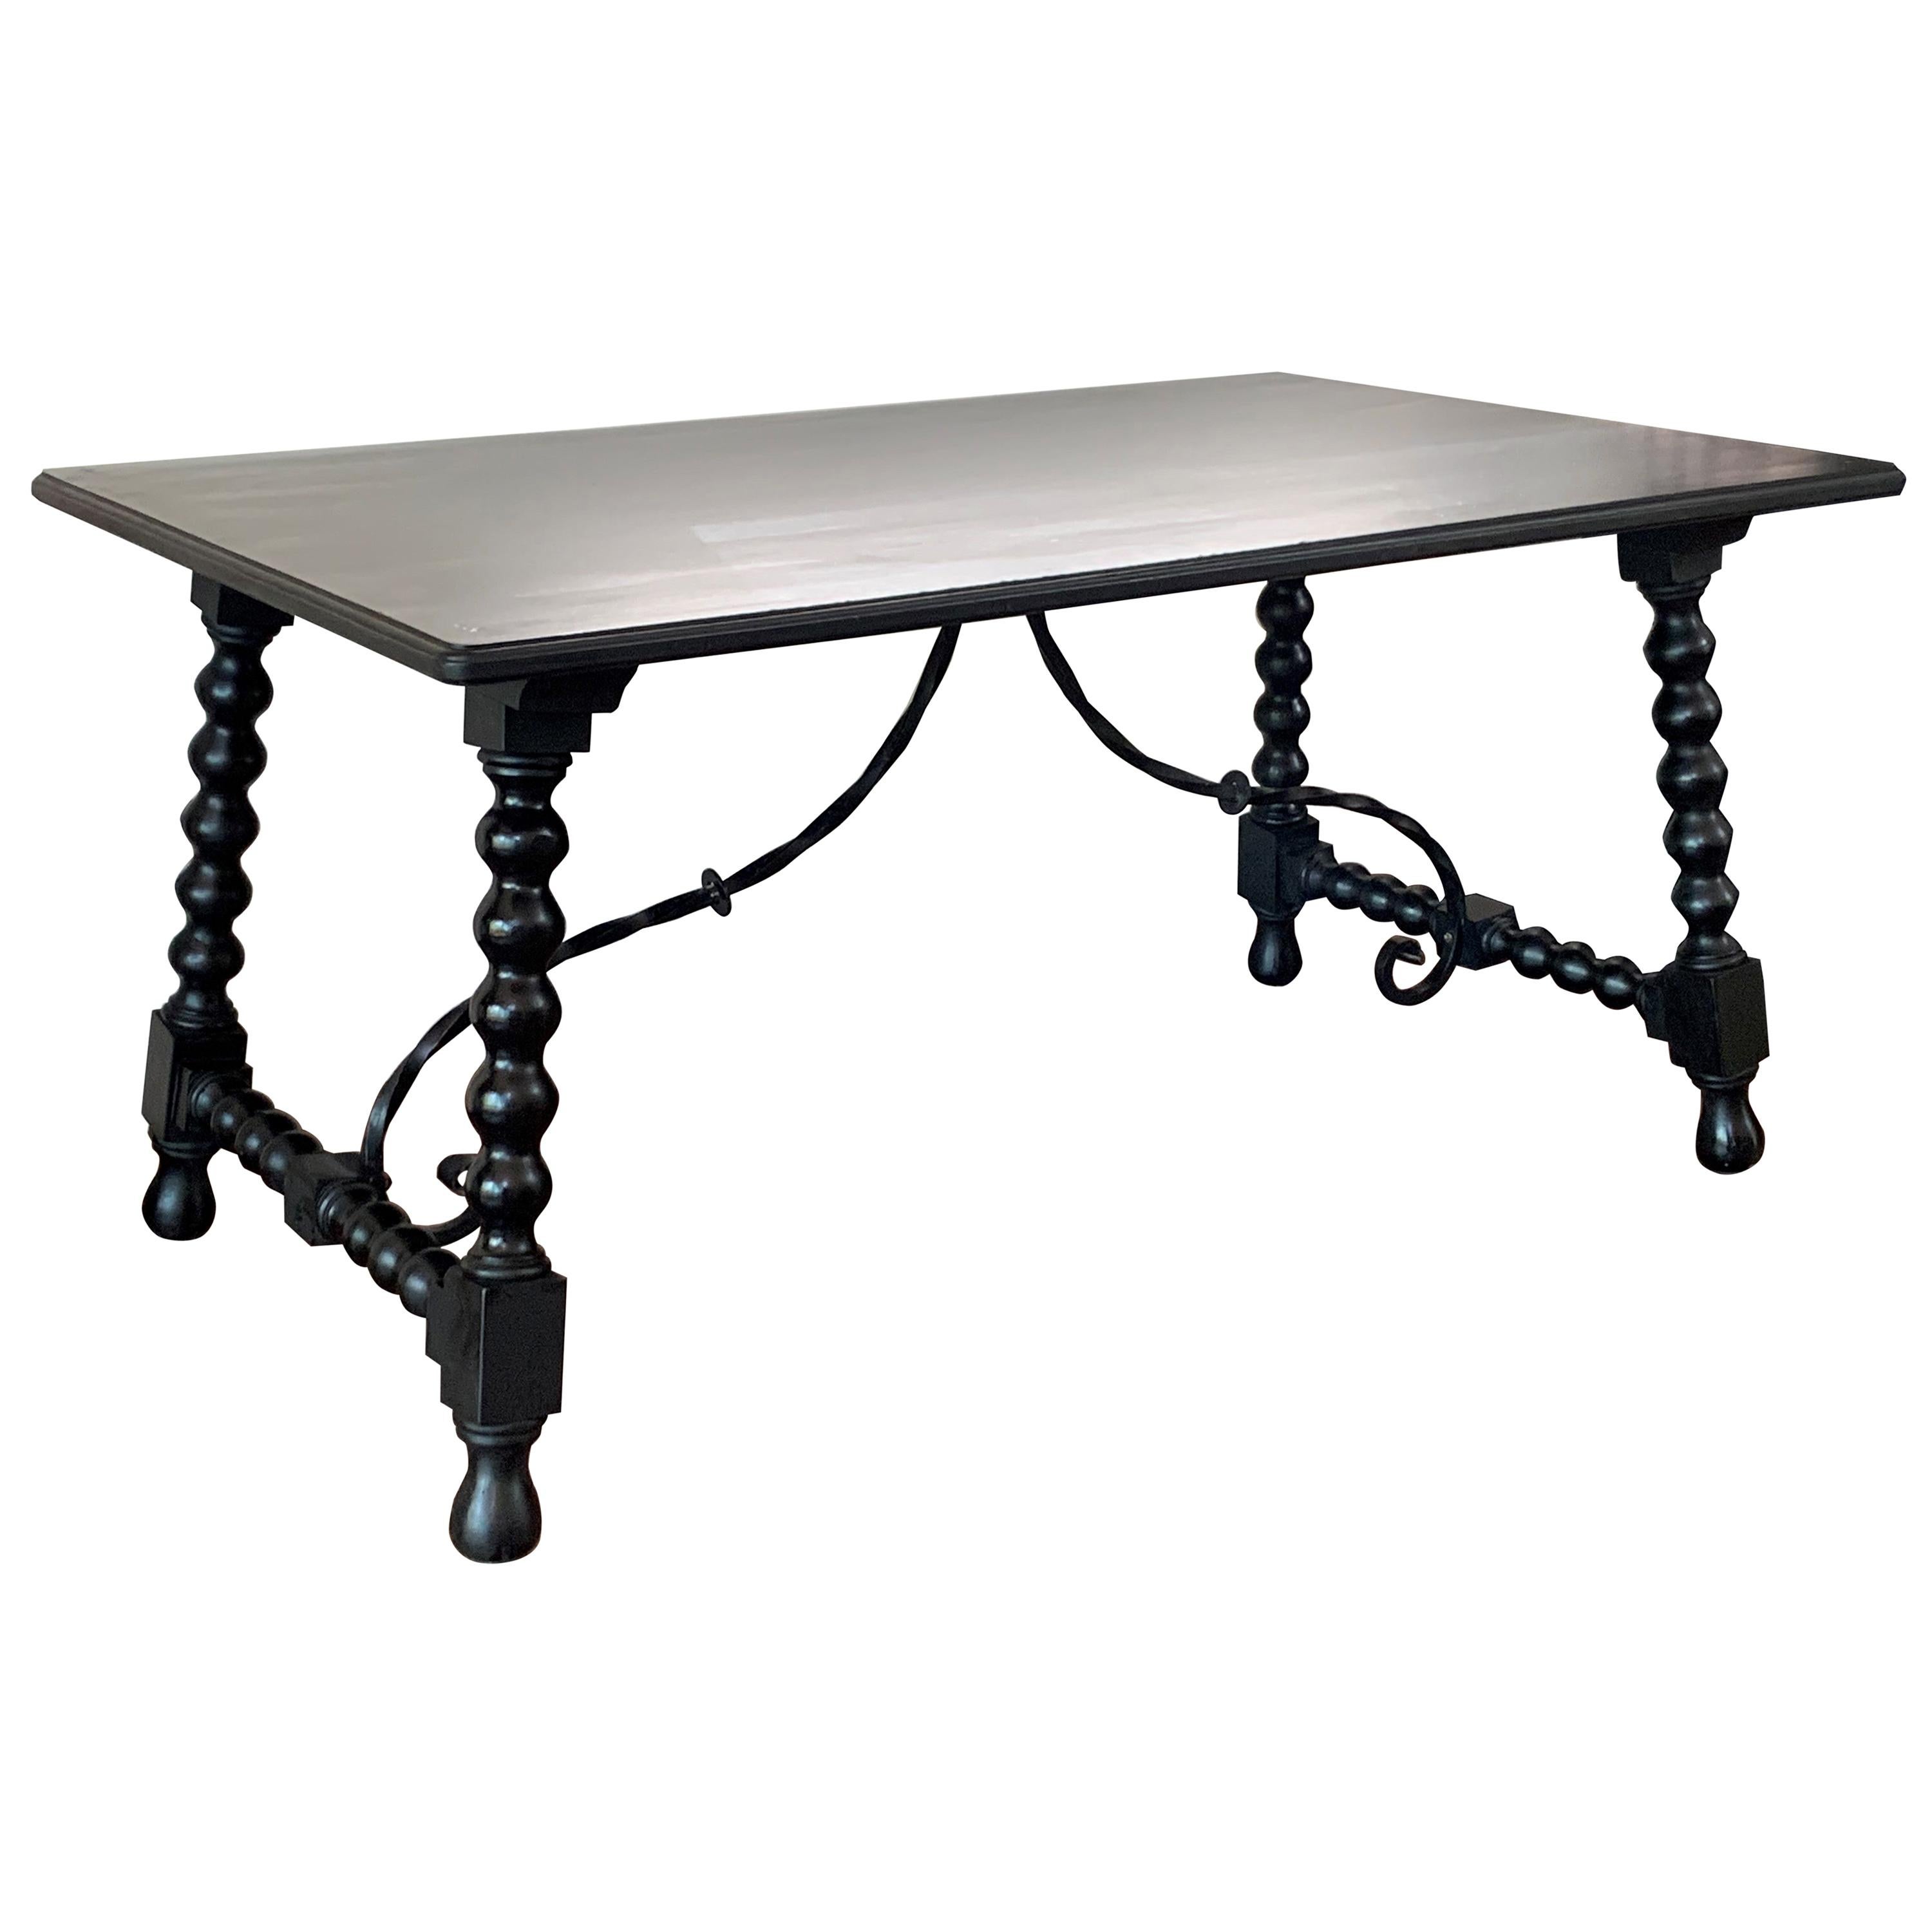 Baroque Spanish Farm Trestle Lyre Leg Dining Room Table with Forged Iron